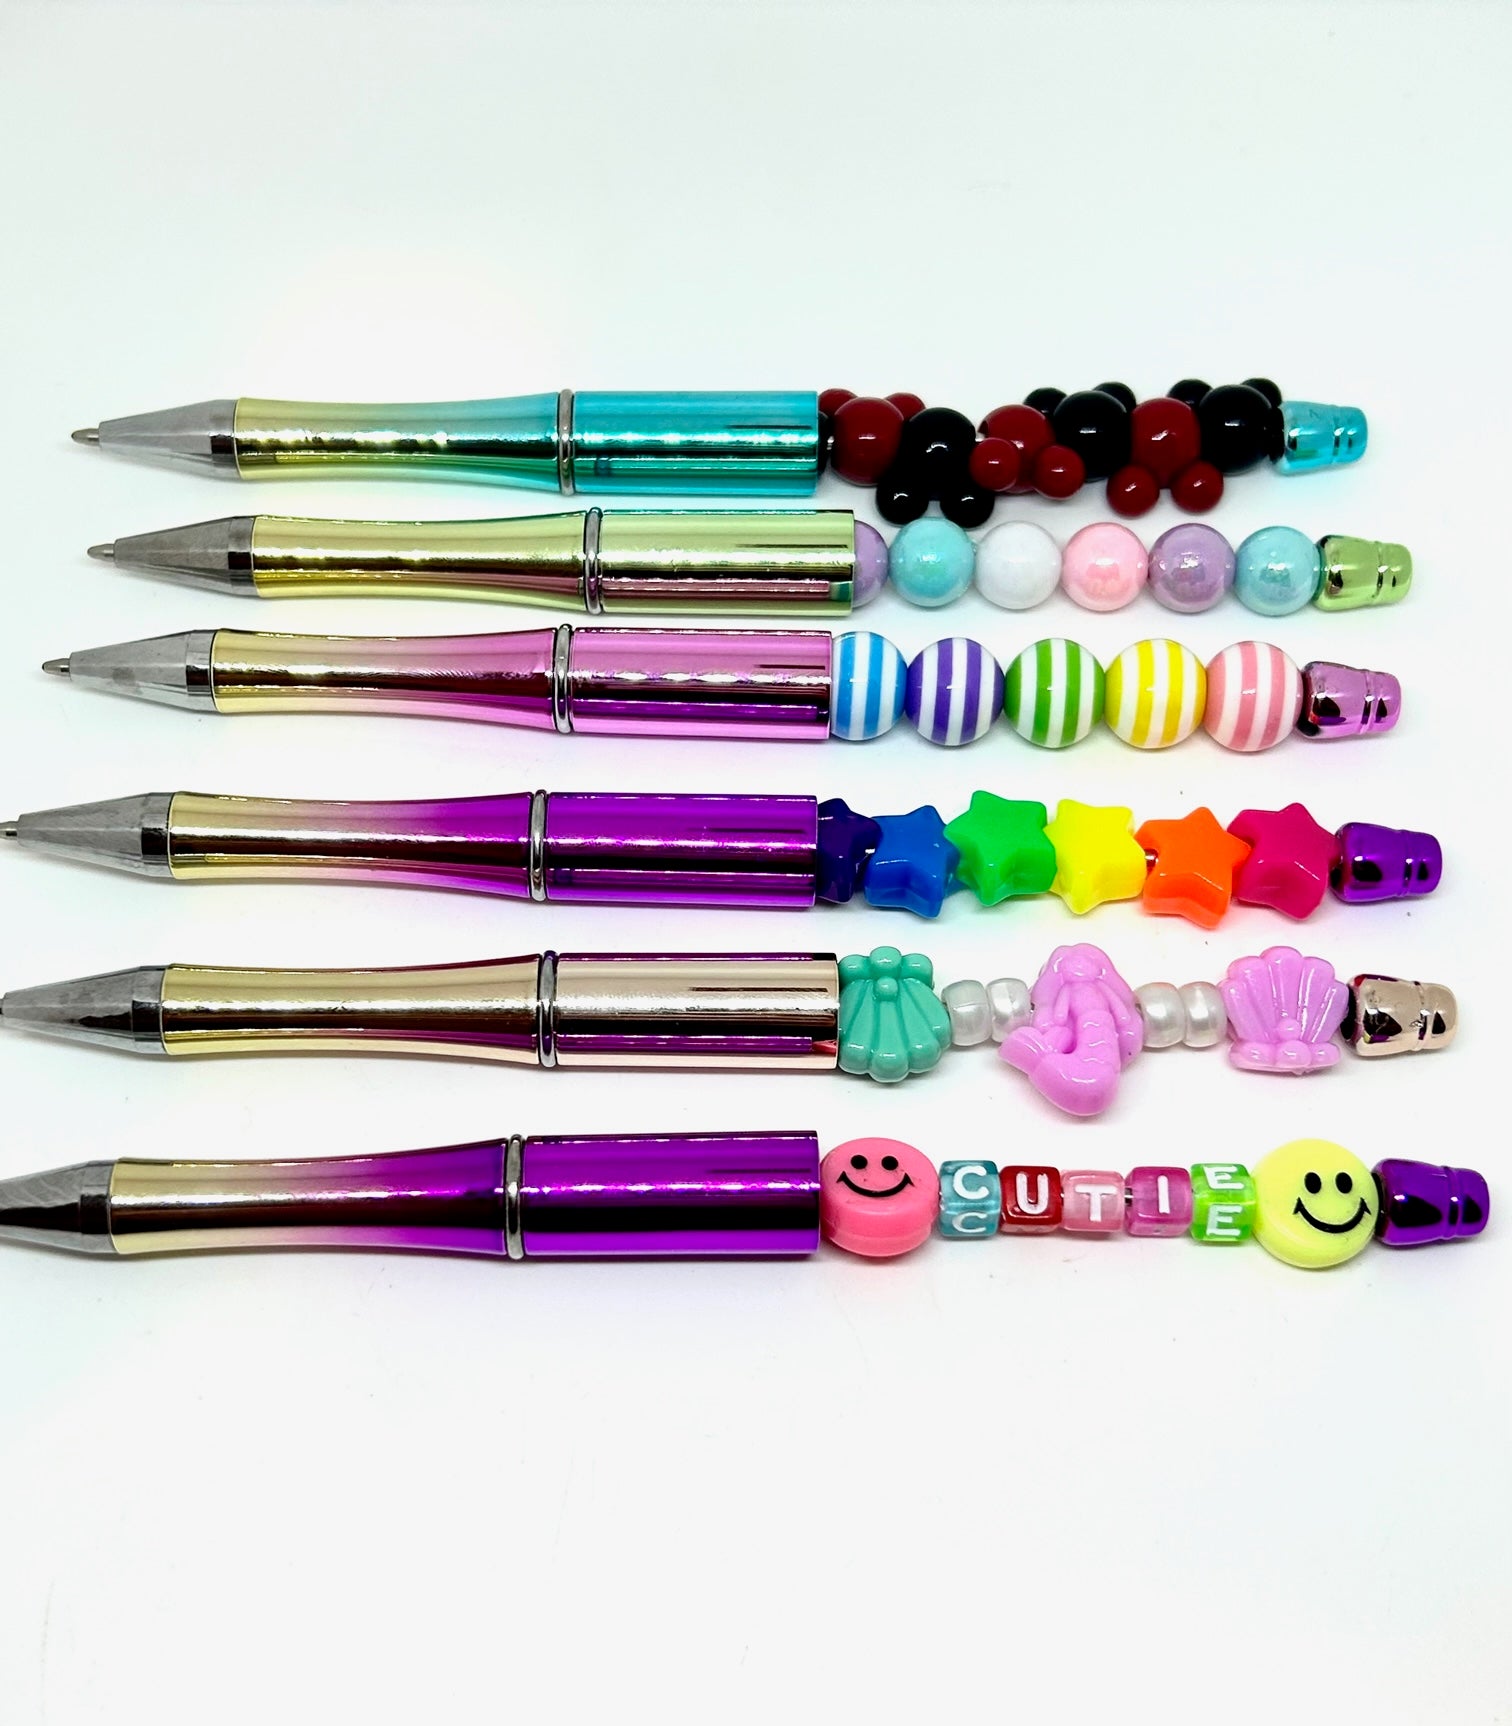 Beadable Pens: The Customizable Gift Idea for Any Occasion